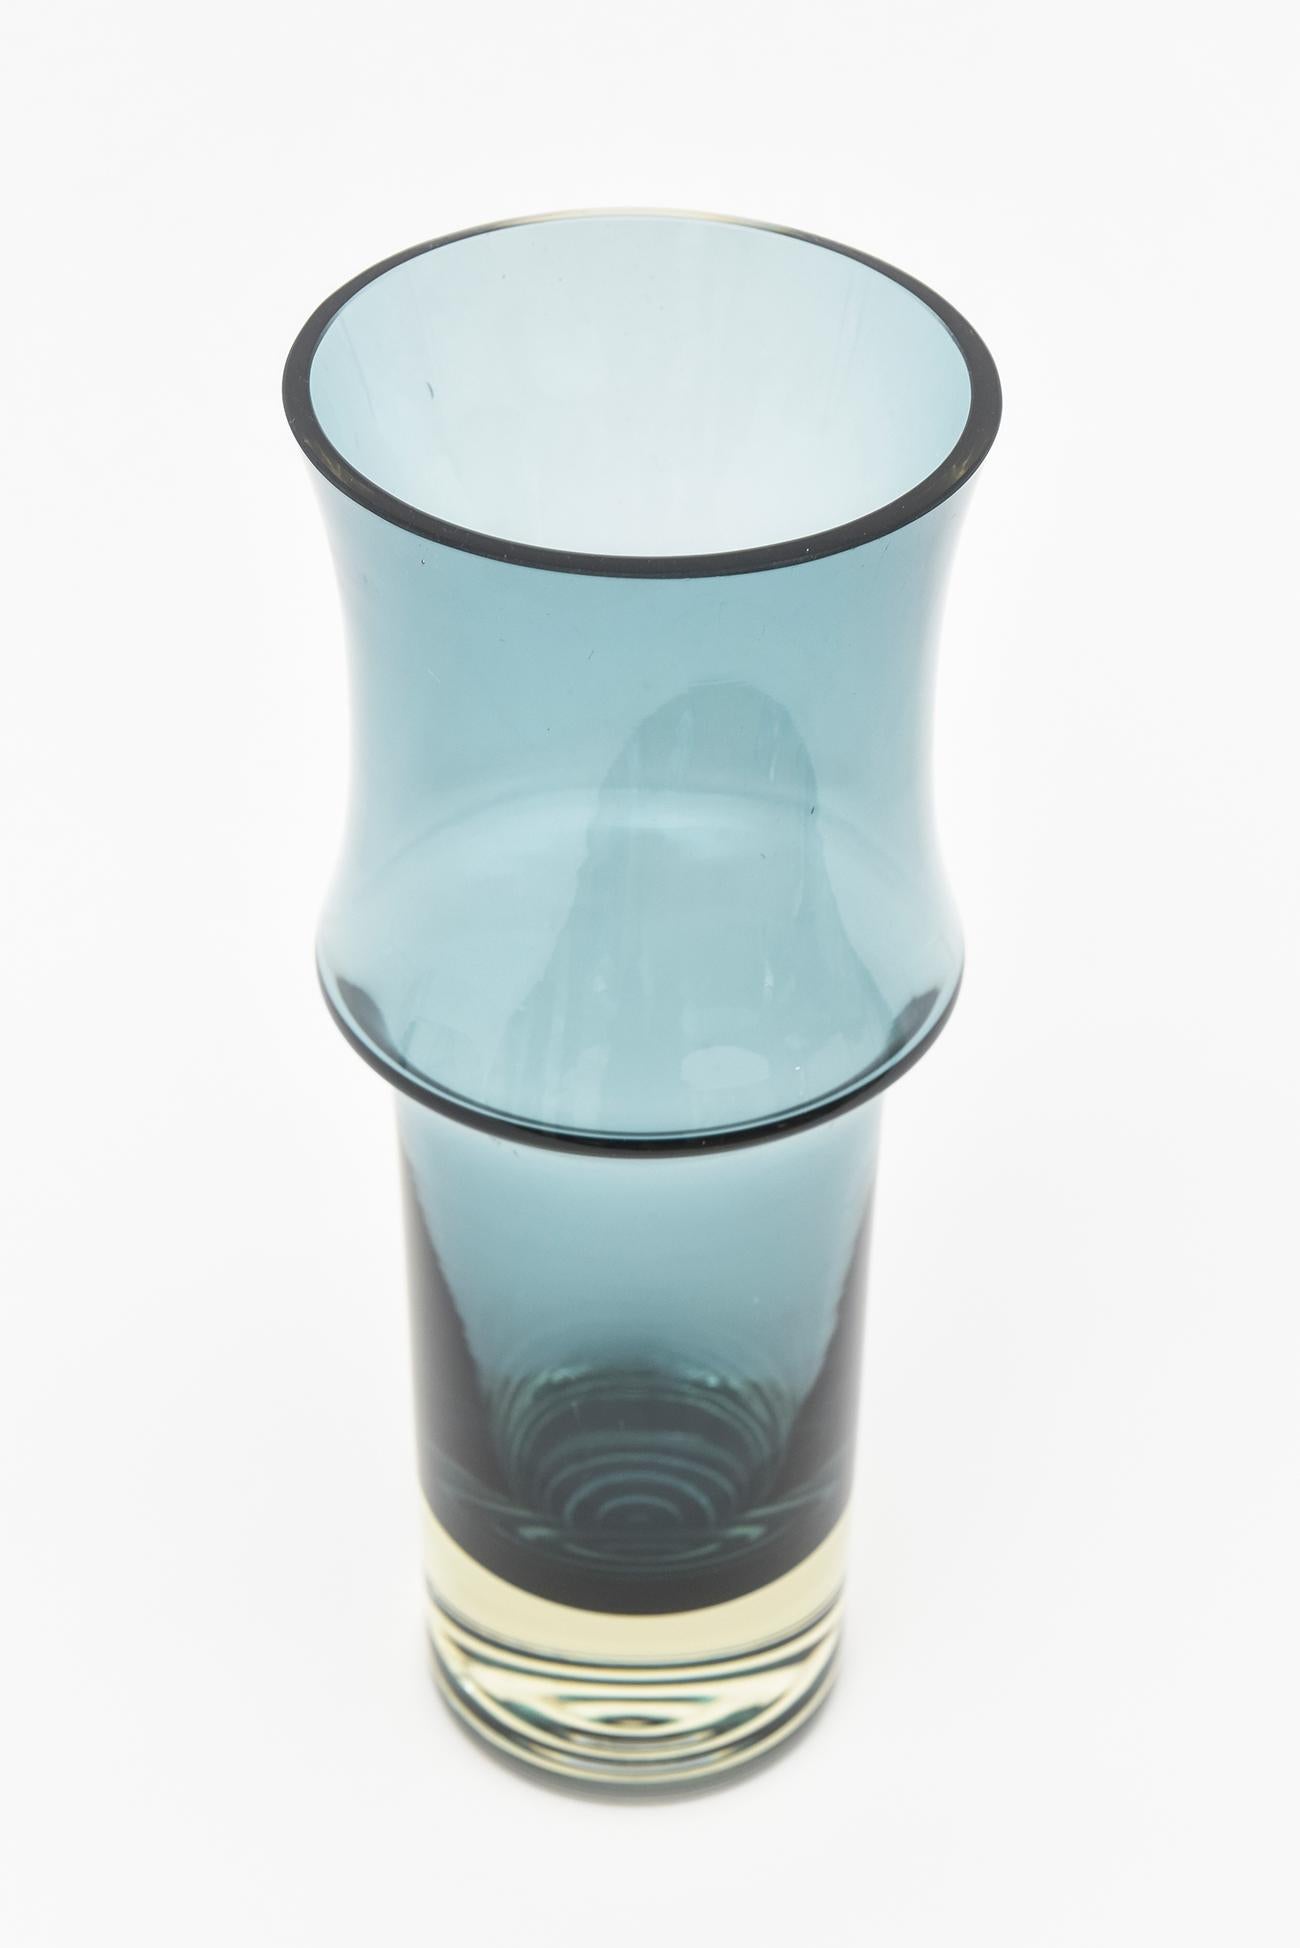 The shape and color of this beautiful simple vintage vase by Holmegaard is a great example of Danish mid century modern. The form is lovely and reinforced with the stunning but hard to describe color that rings teal blue cornflower with a light hint